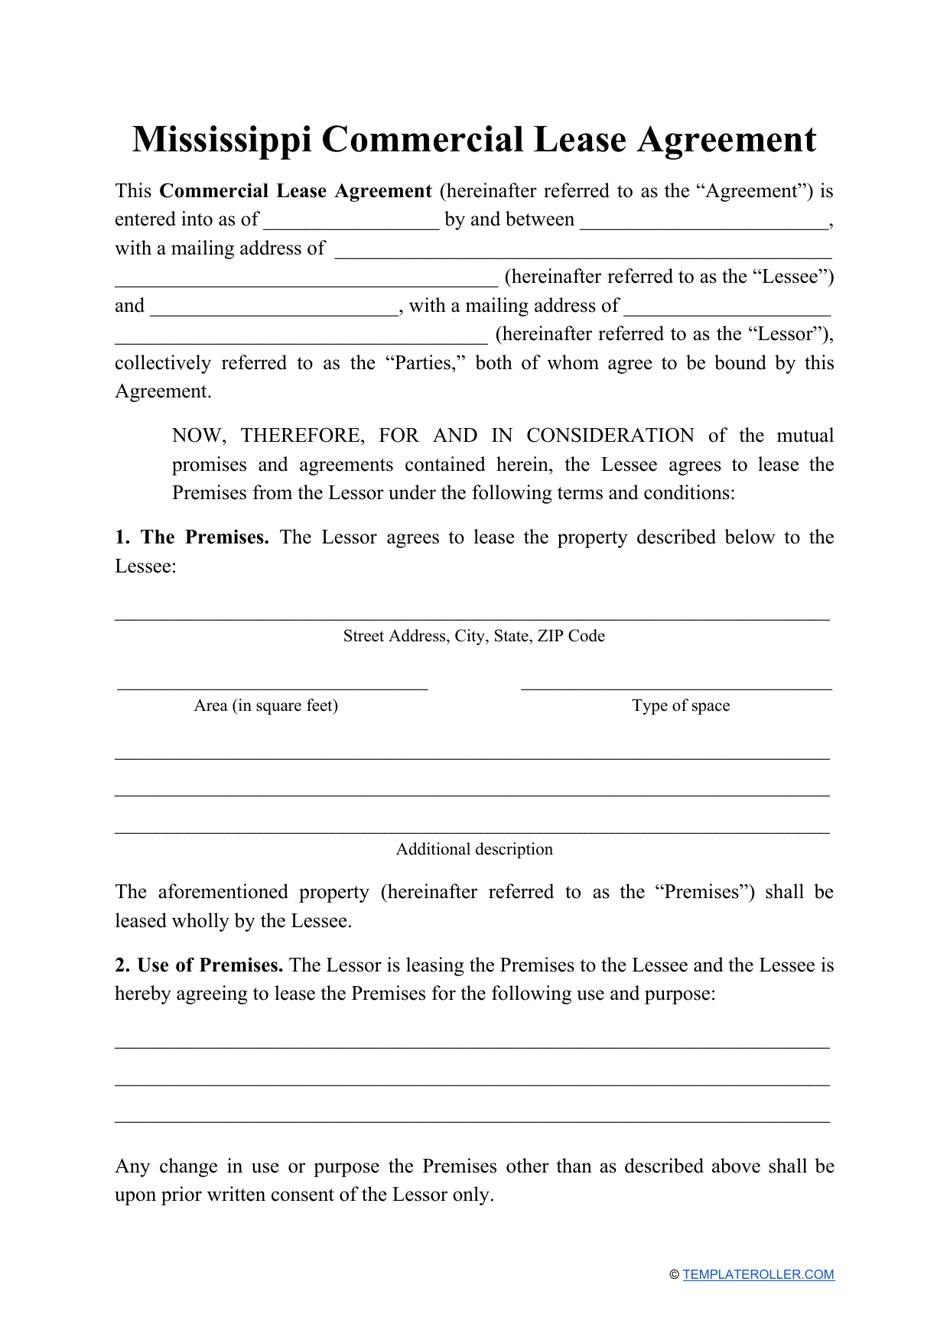 Commercial Lease Agreement Template - Mississippi, Page 1